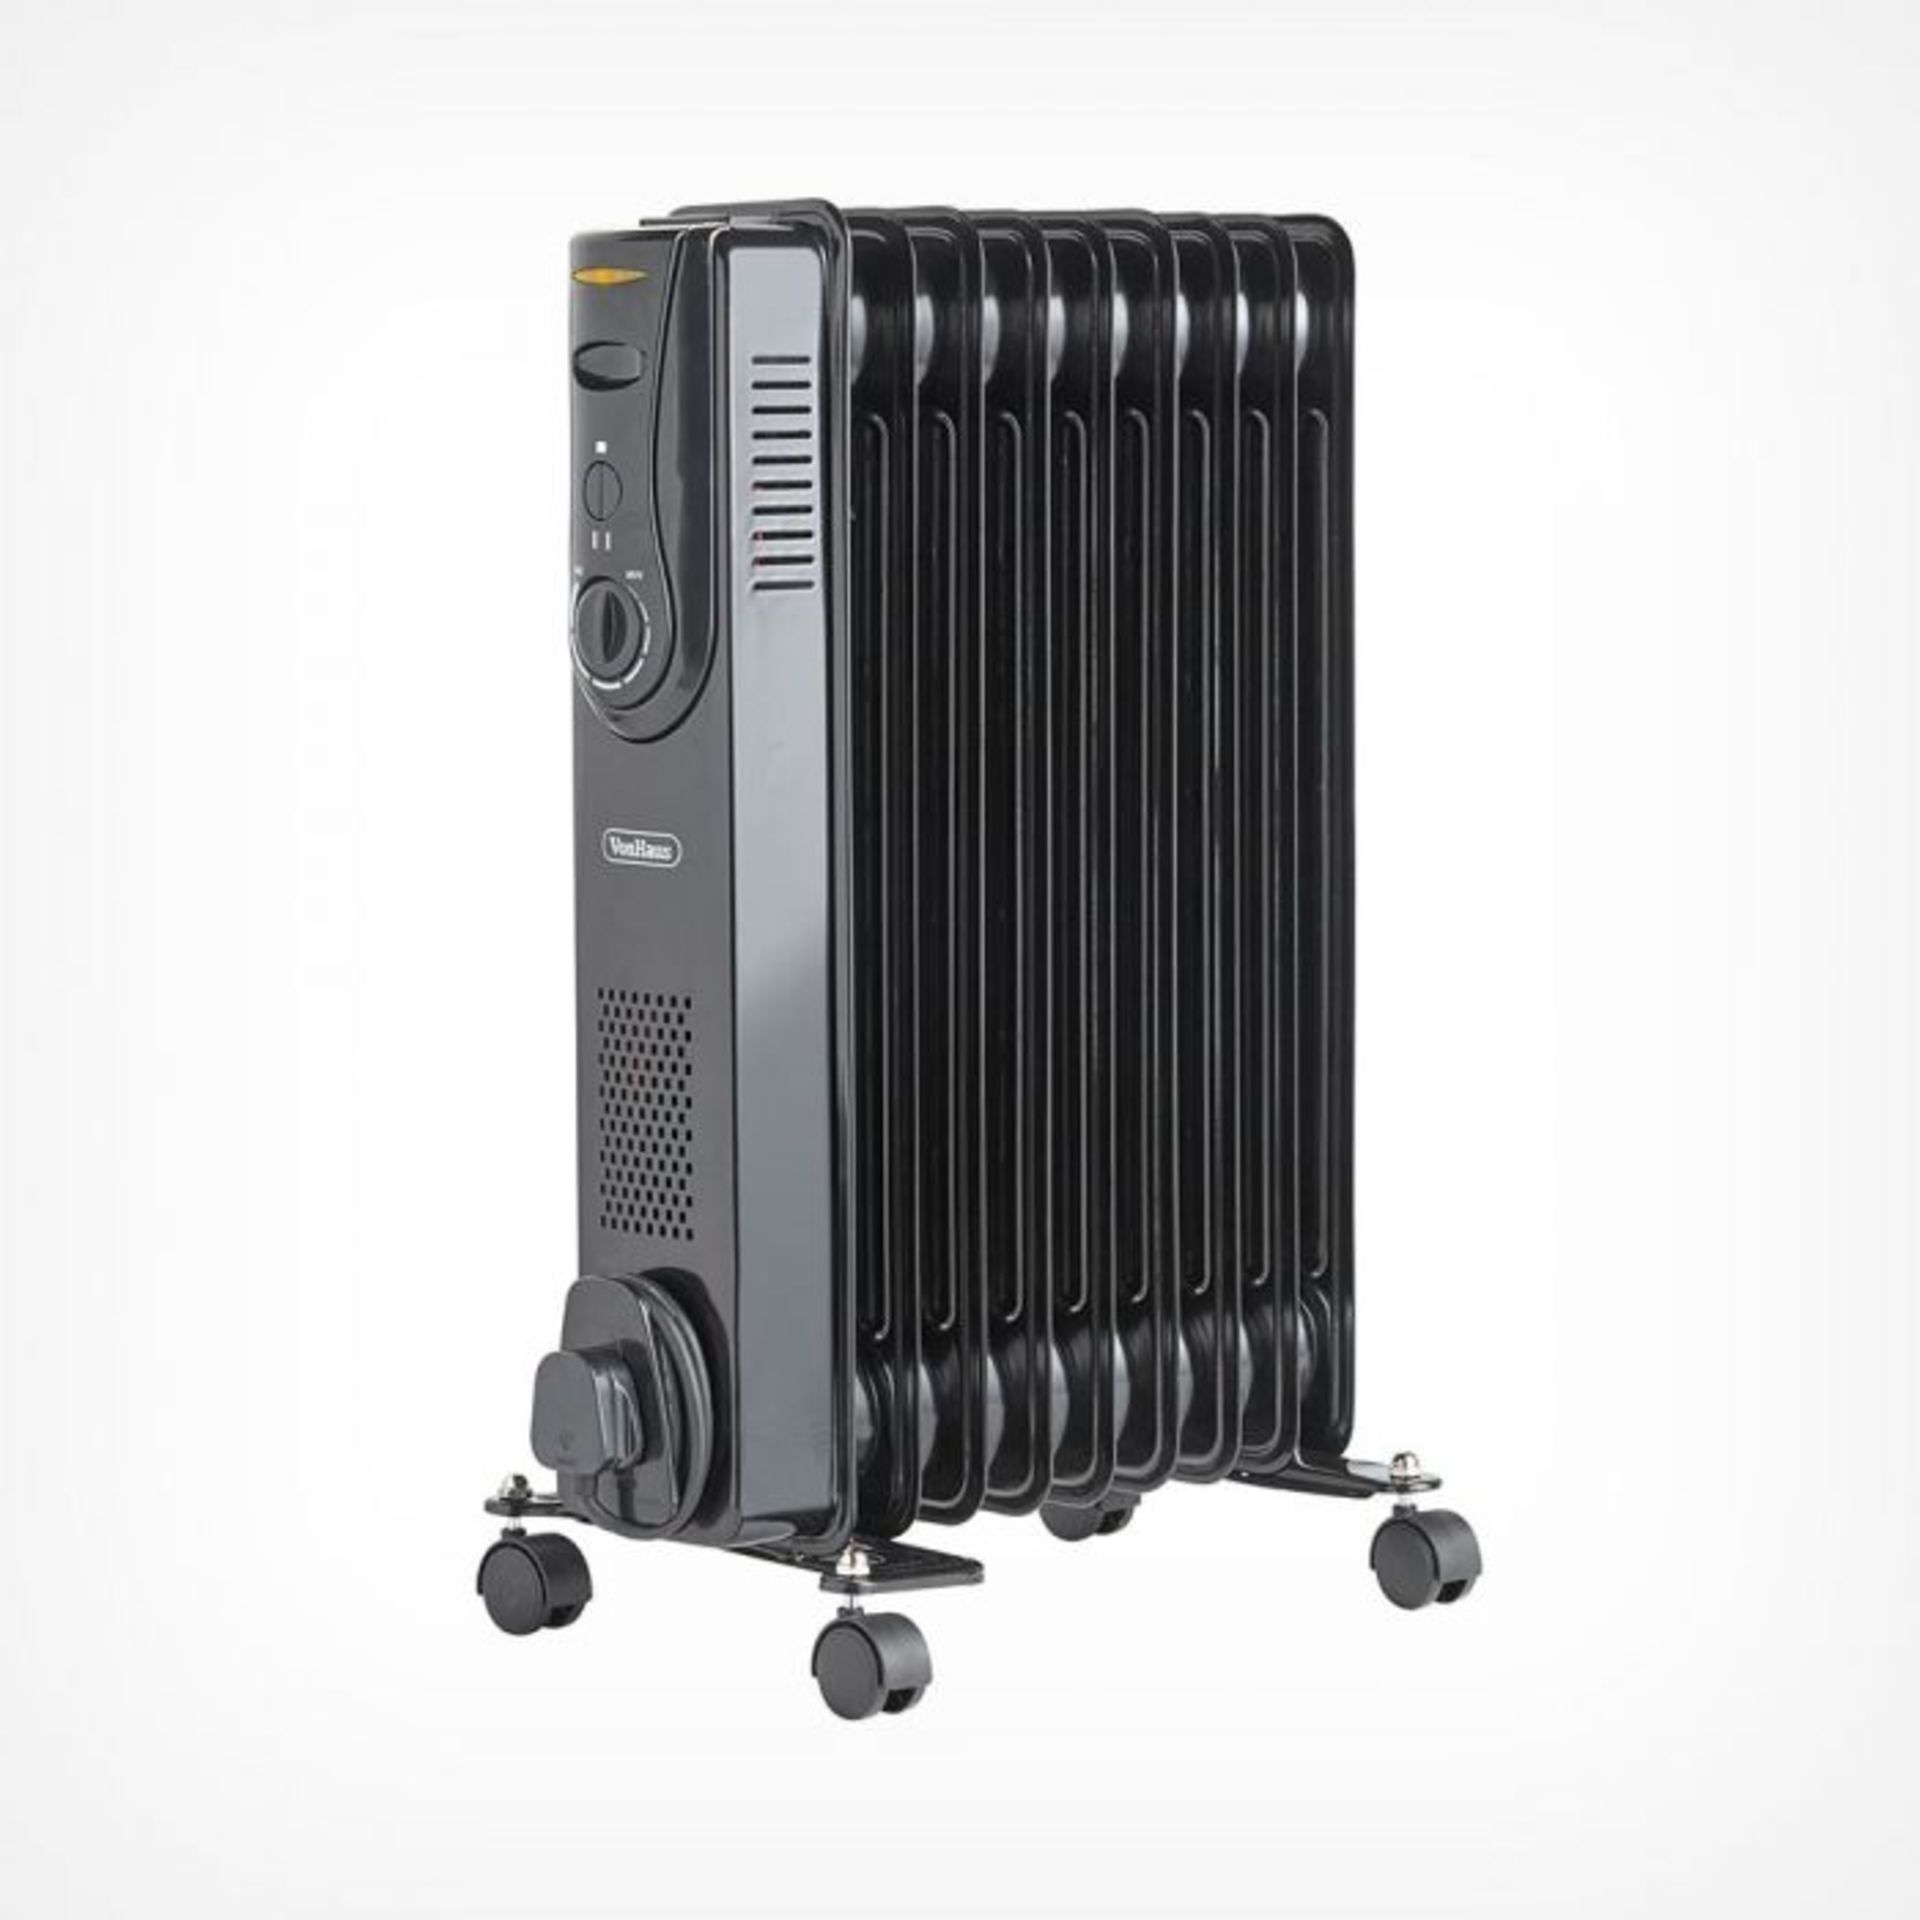 (V131) 9 Fin 2000W Oil Filled Radiator - Black Powerful 2000W radiator with 9 oil-filled fins ... - Image 2 of 3